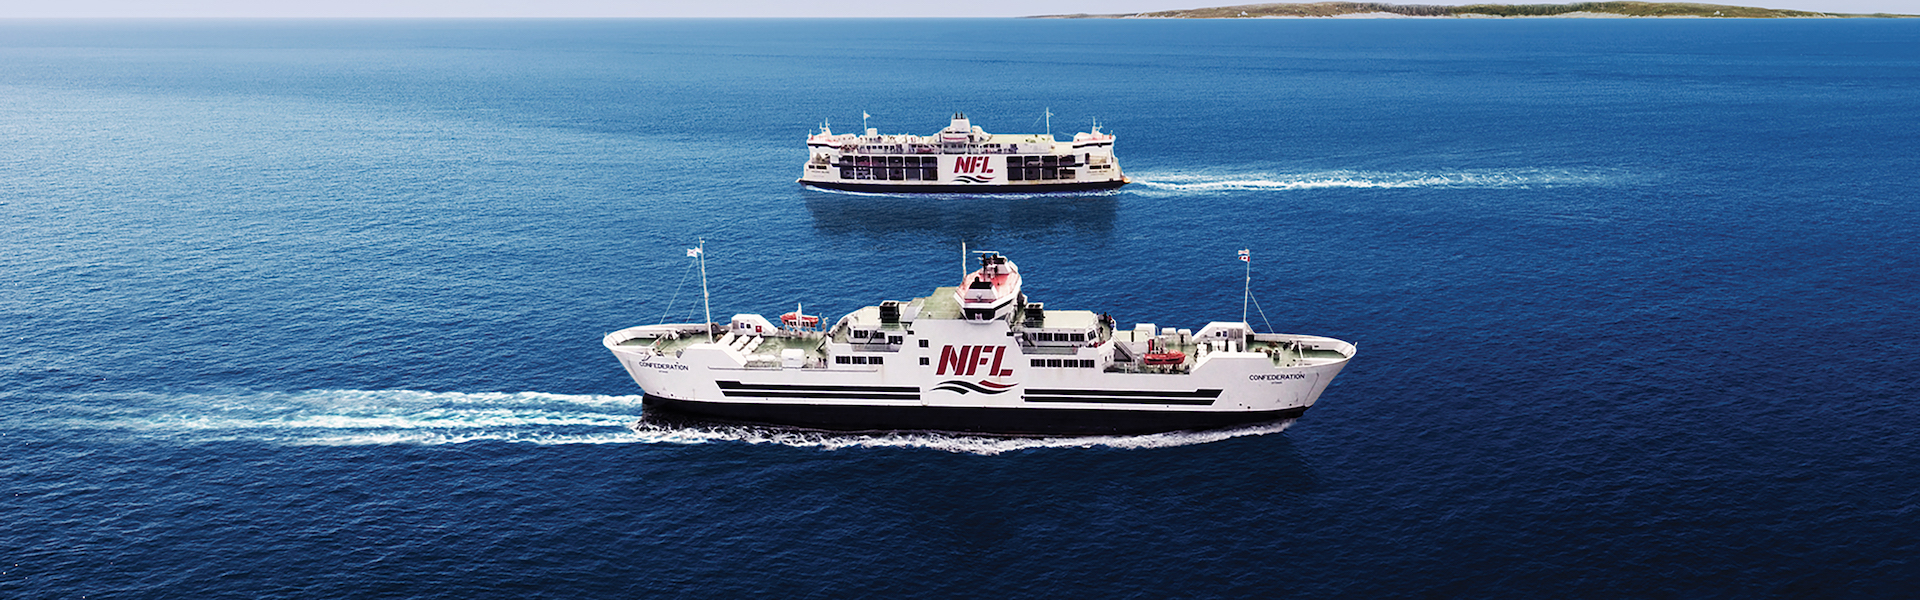 2 NFL Ferries passing each other